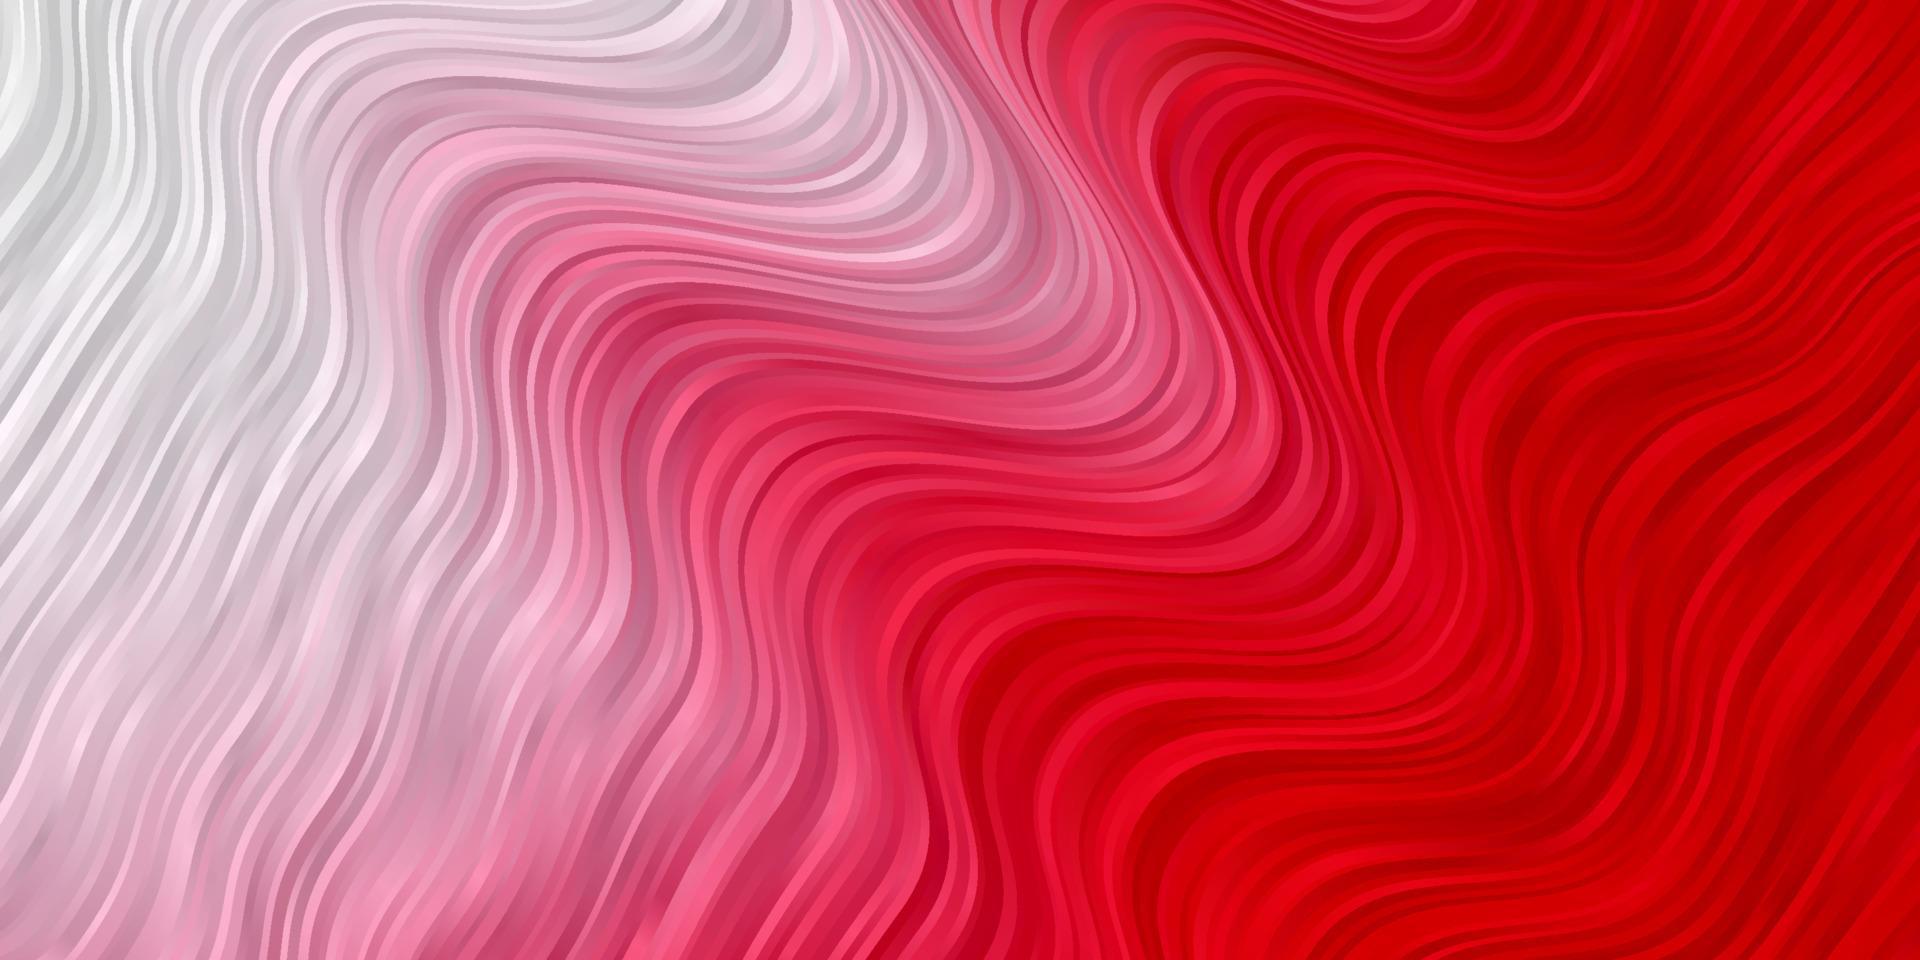 Light Red vector background with curves.